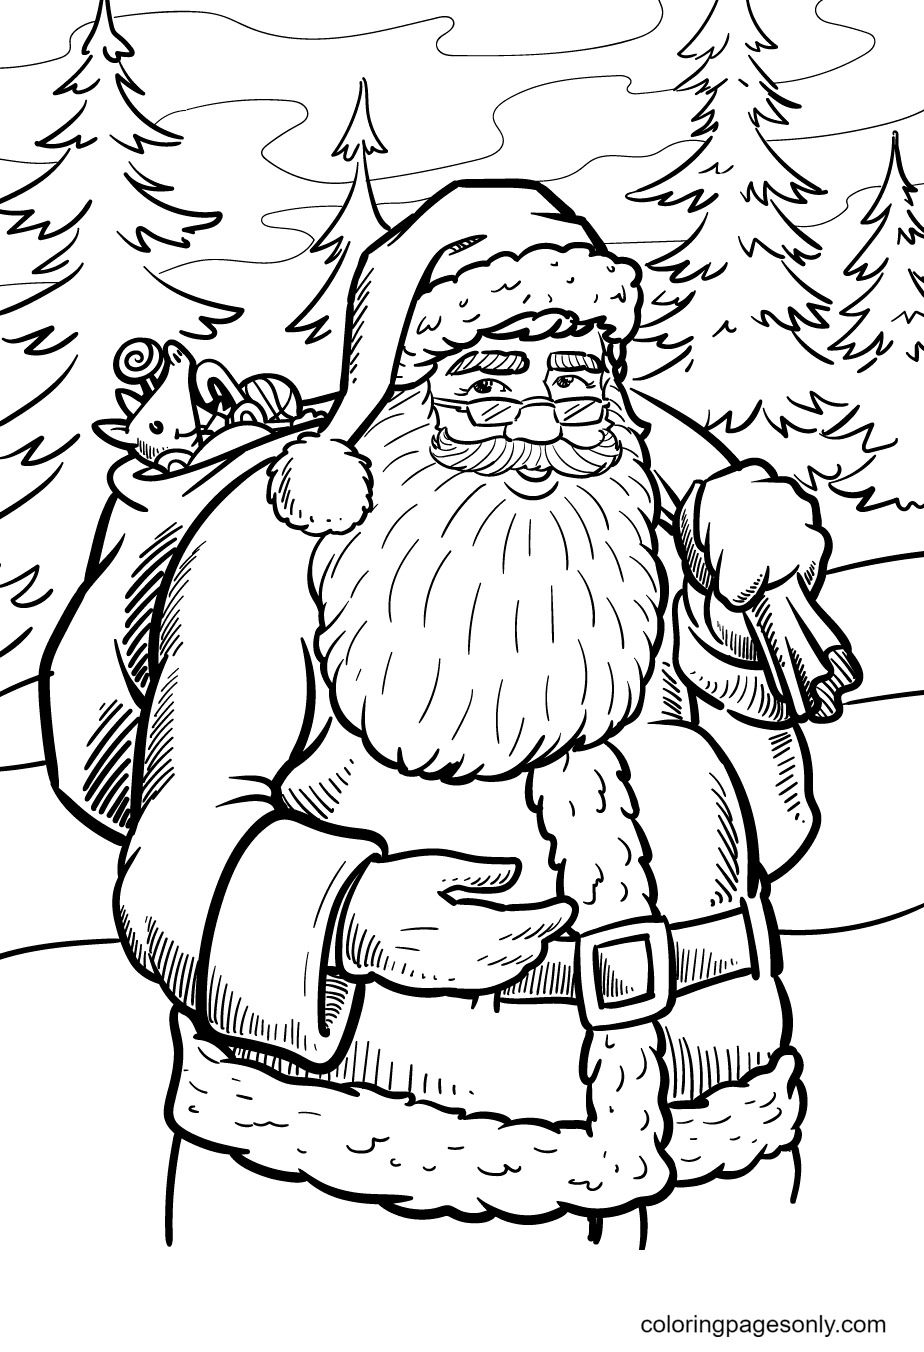 Santa Claus with Pine Trees Coloring Pages